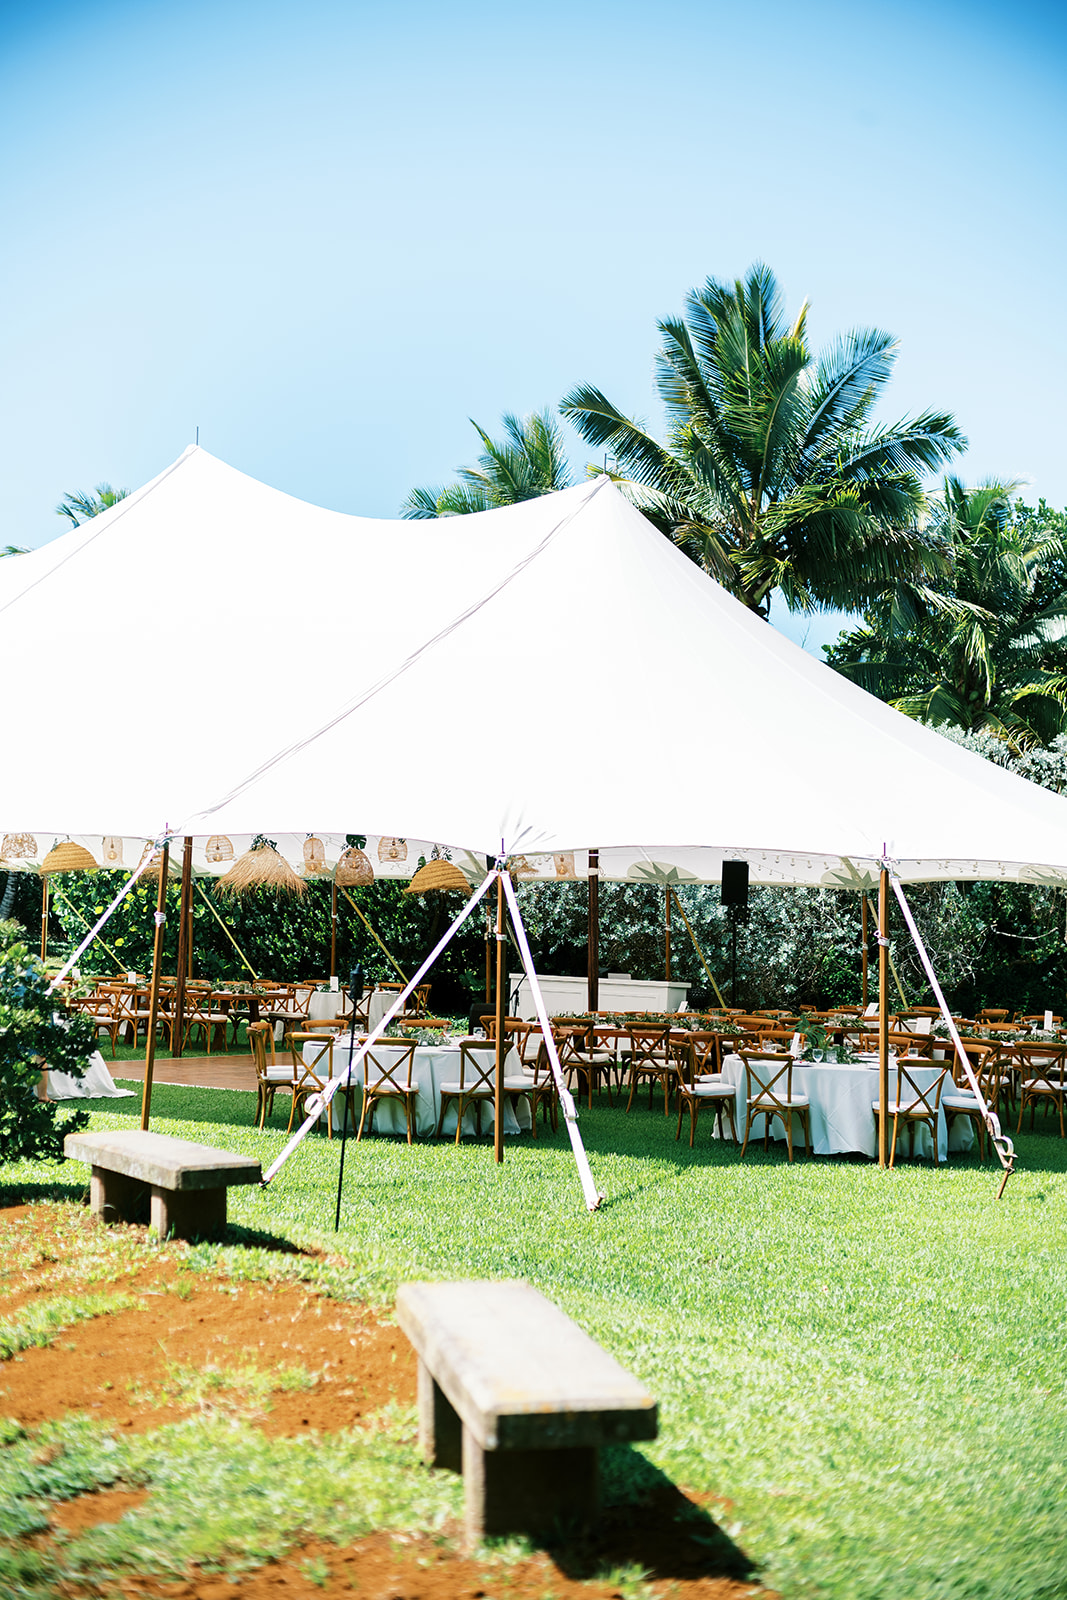 An outdoor event setup with a large white tent, wooden benches, and tables on a lush green lawn surrounded by palm trees